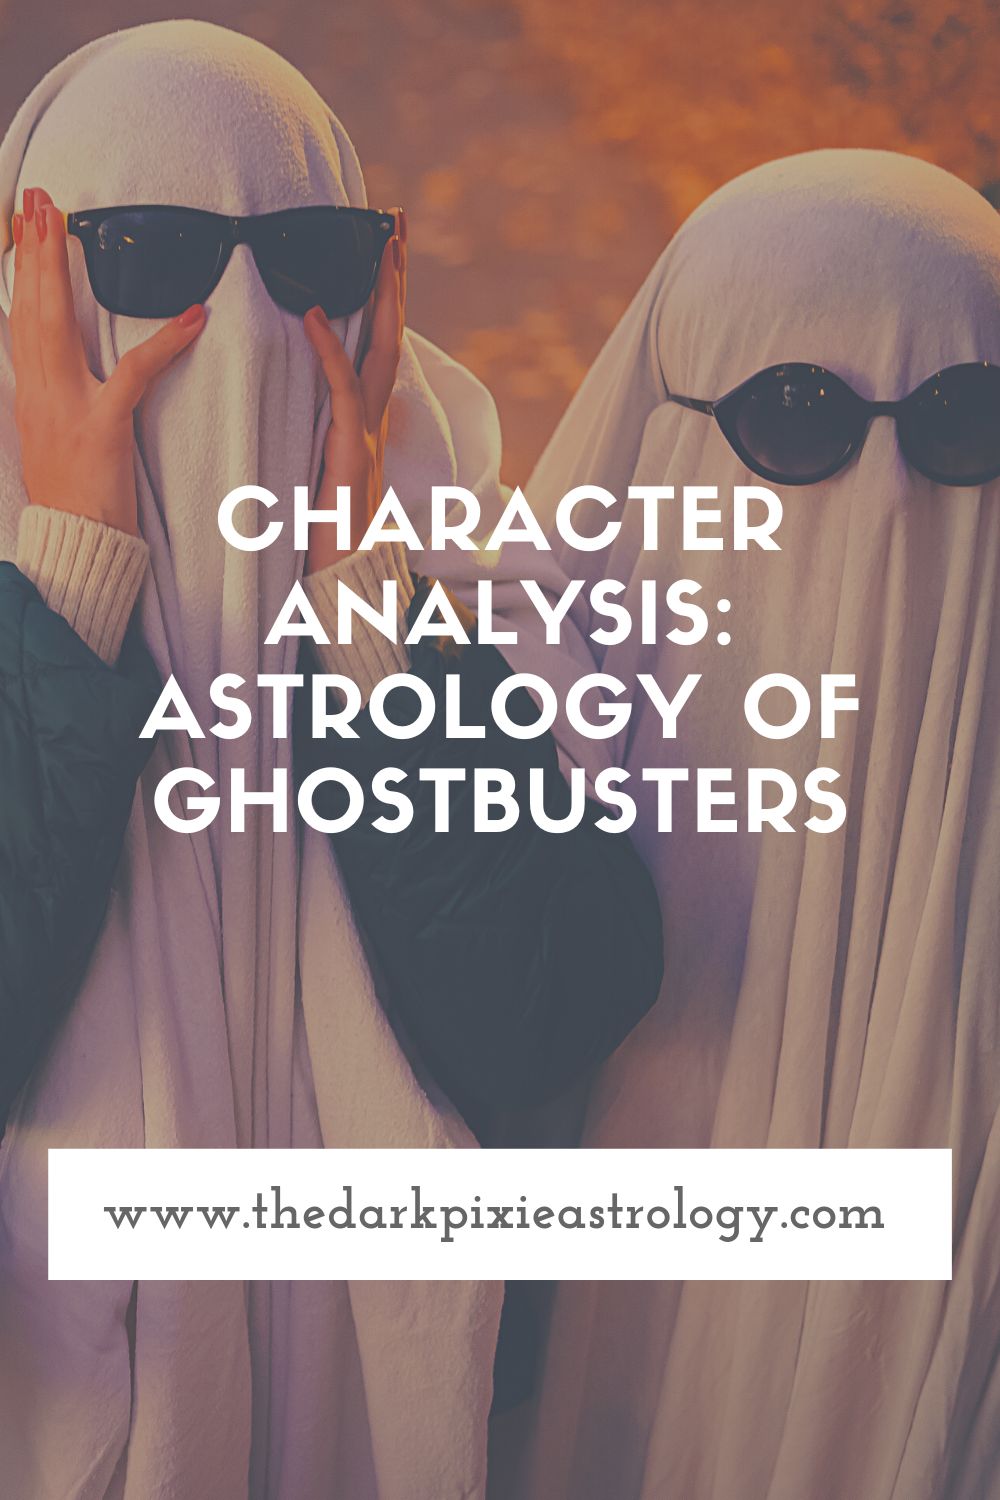 Character Analysis: The Astrology of Ghostbusters - The Dark Pixie Astrology